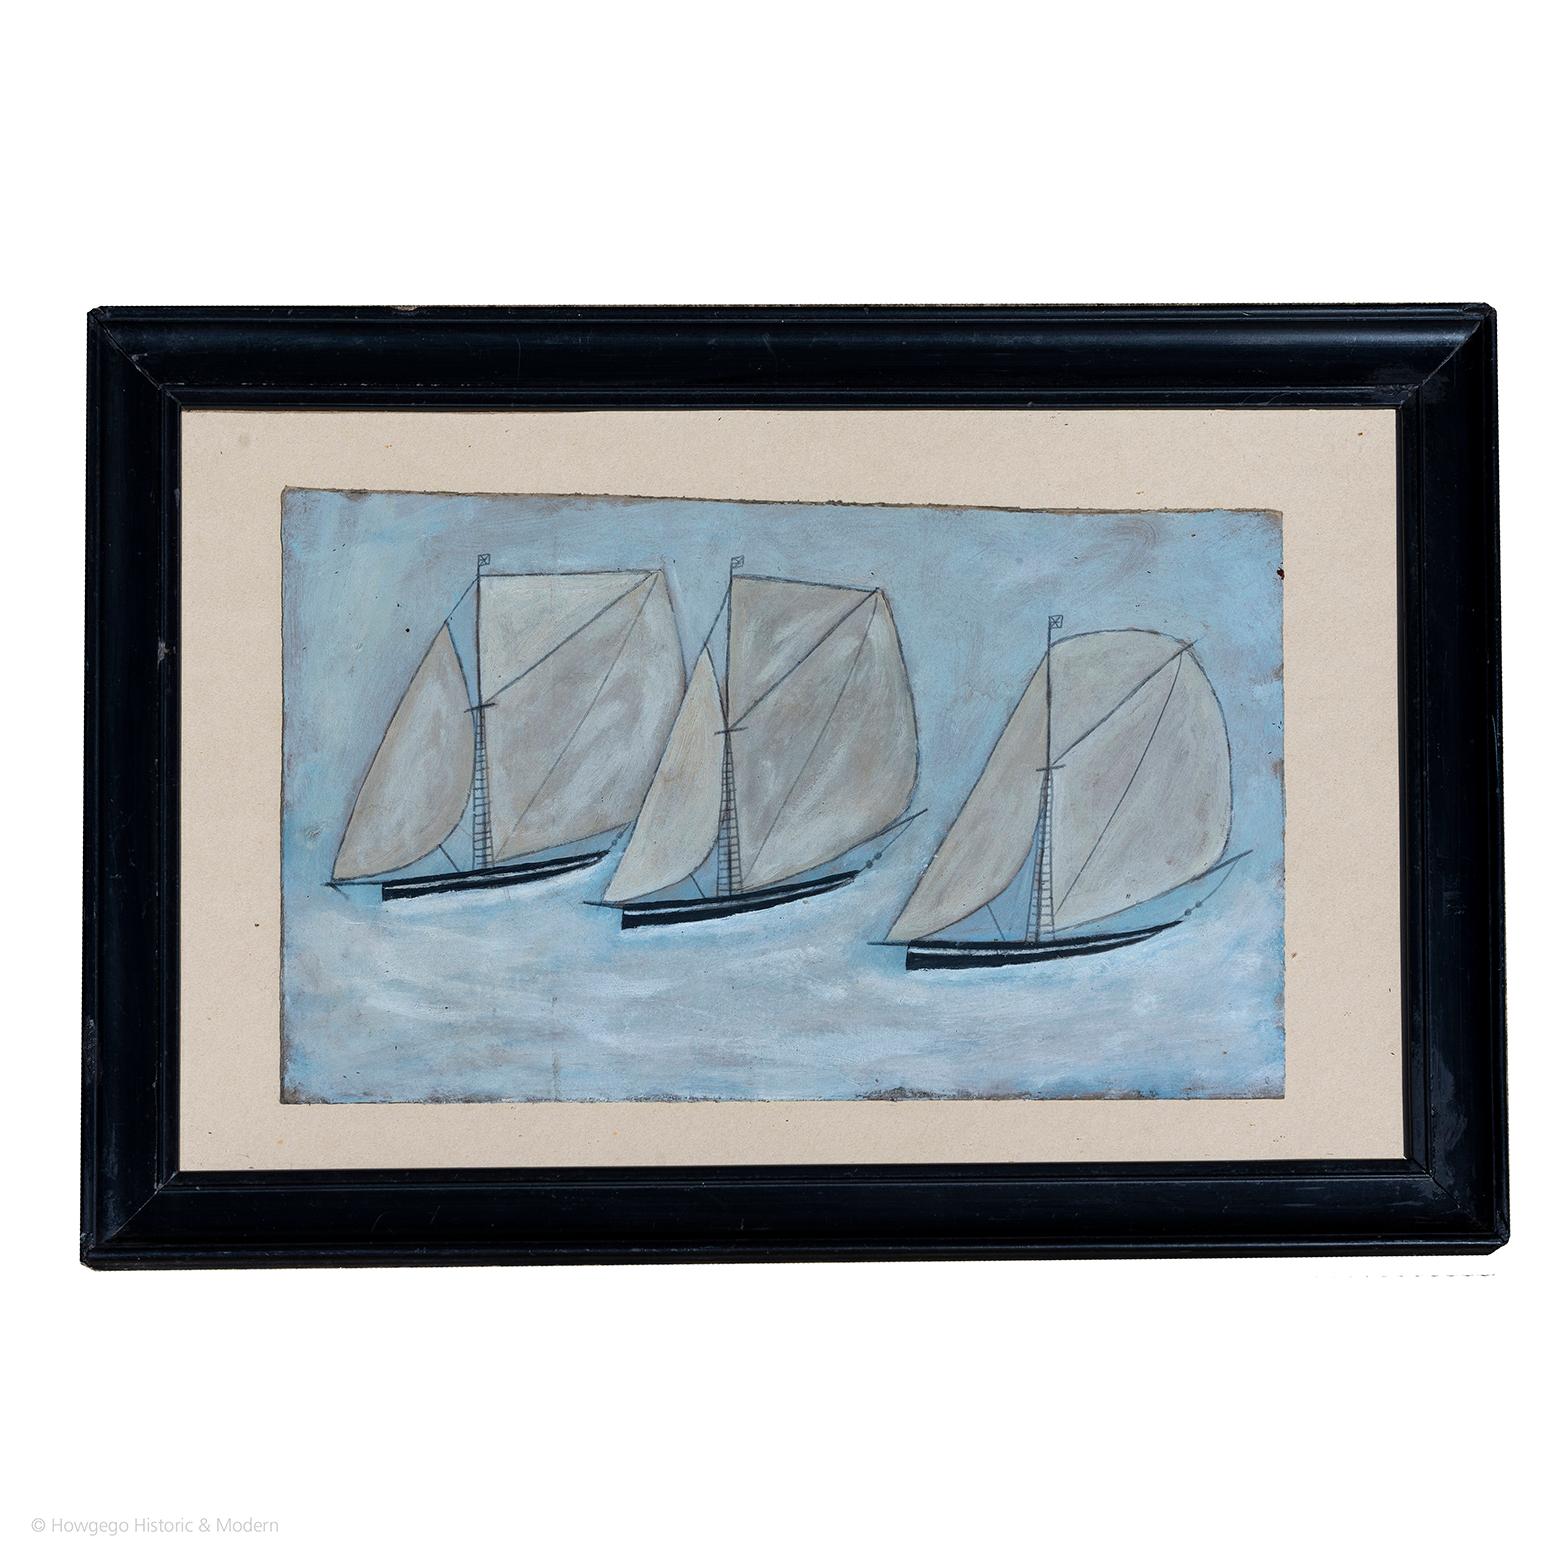 Three sloops under full sail 
Oil on cardboard
Characterful naive picture in the spirit of Alfred Wallis

Board Length 41cm., 16